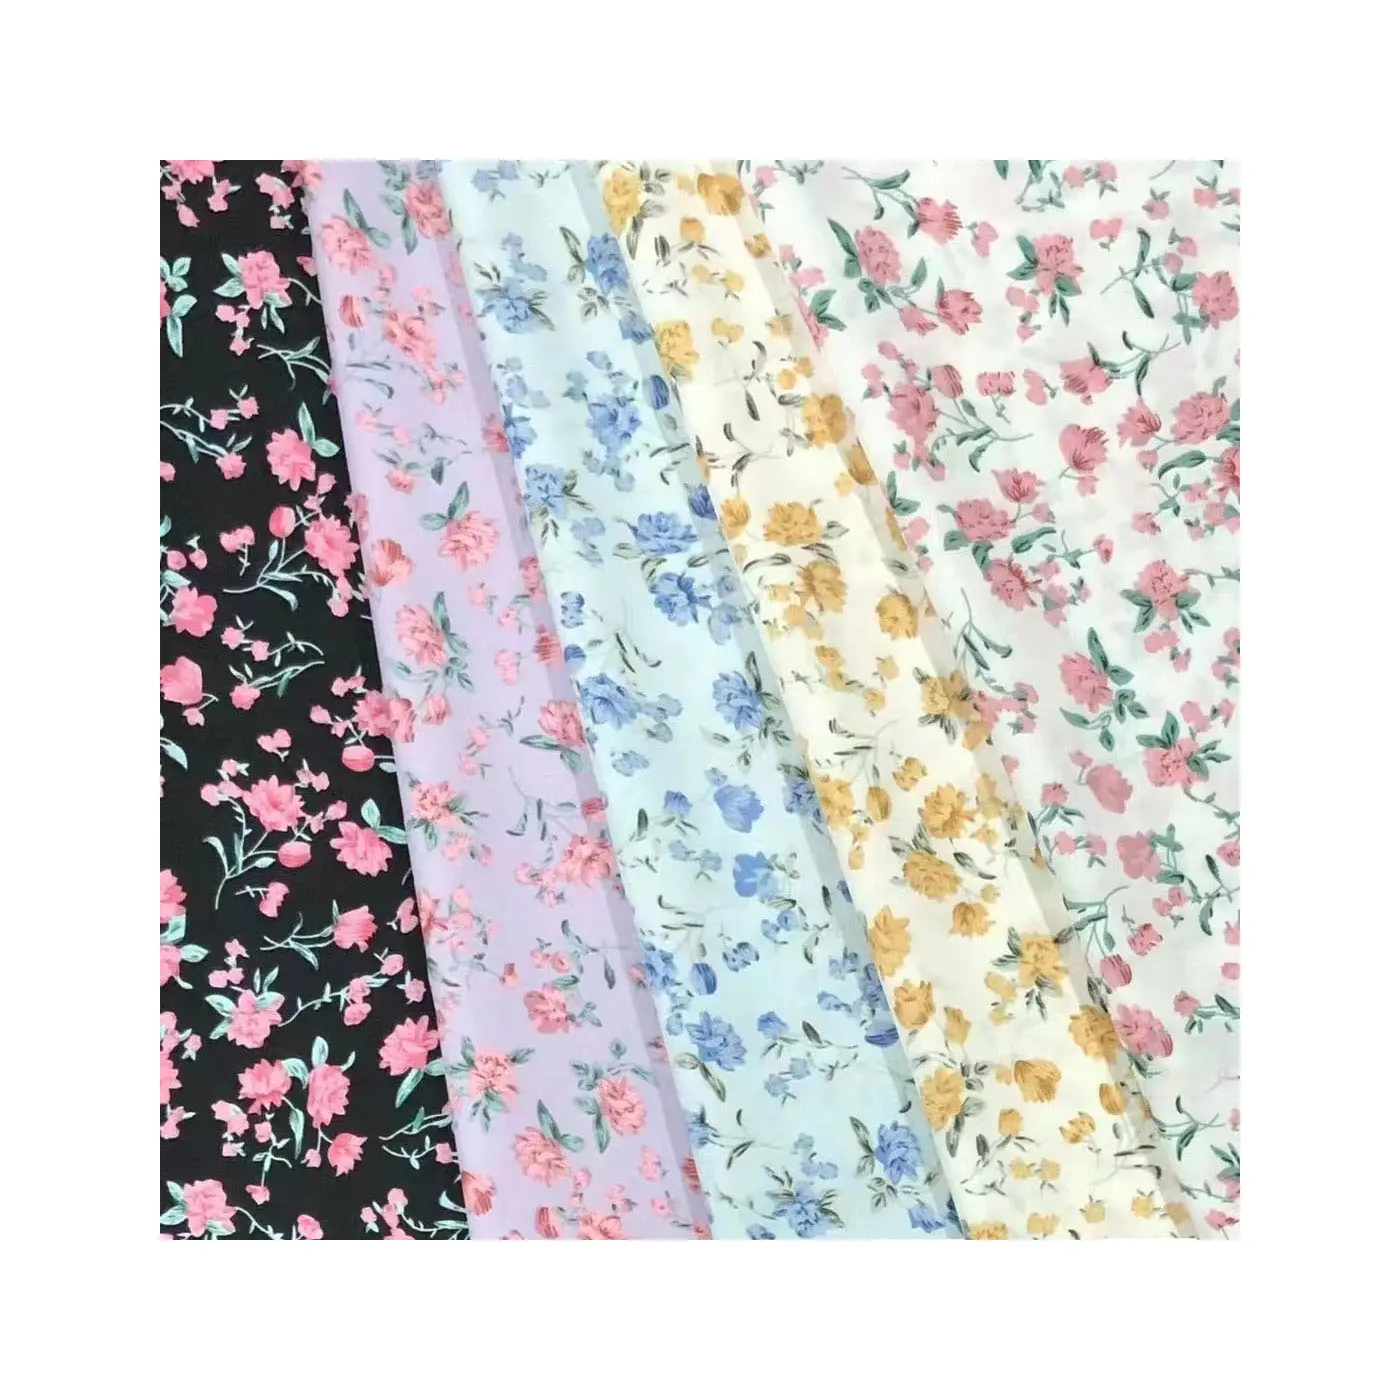 Wholesale cheapest comfortable fashionable floral design polyester chiffon fabric printed for women summer clothes